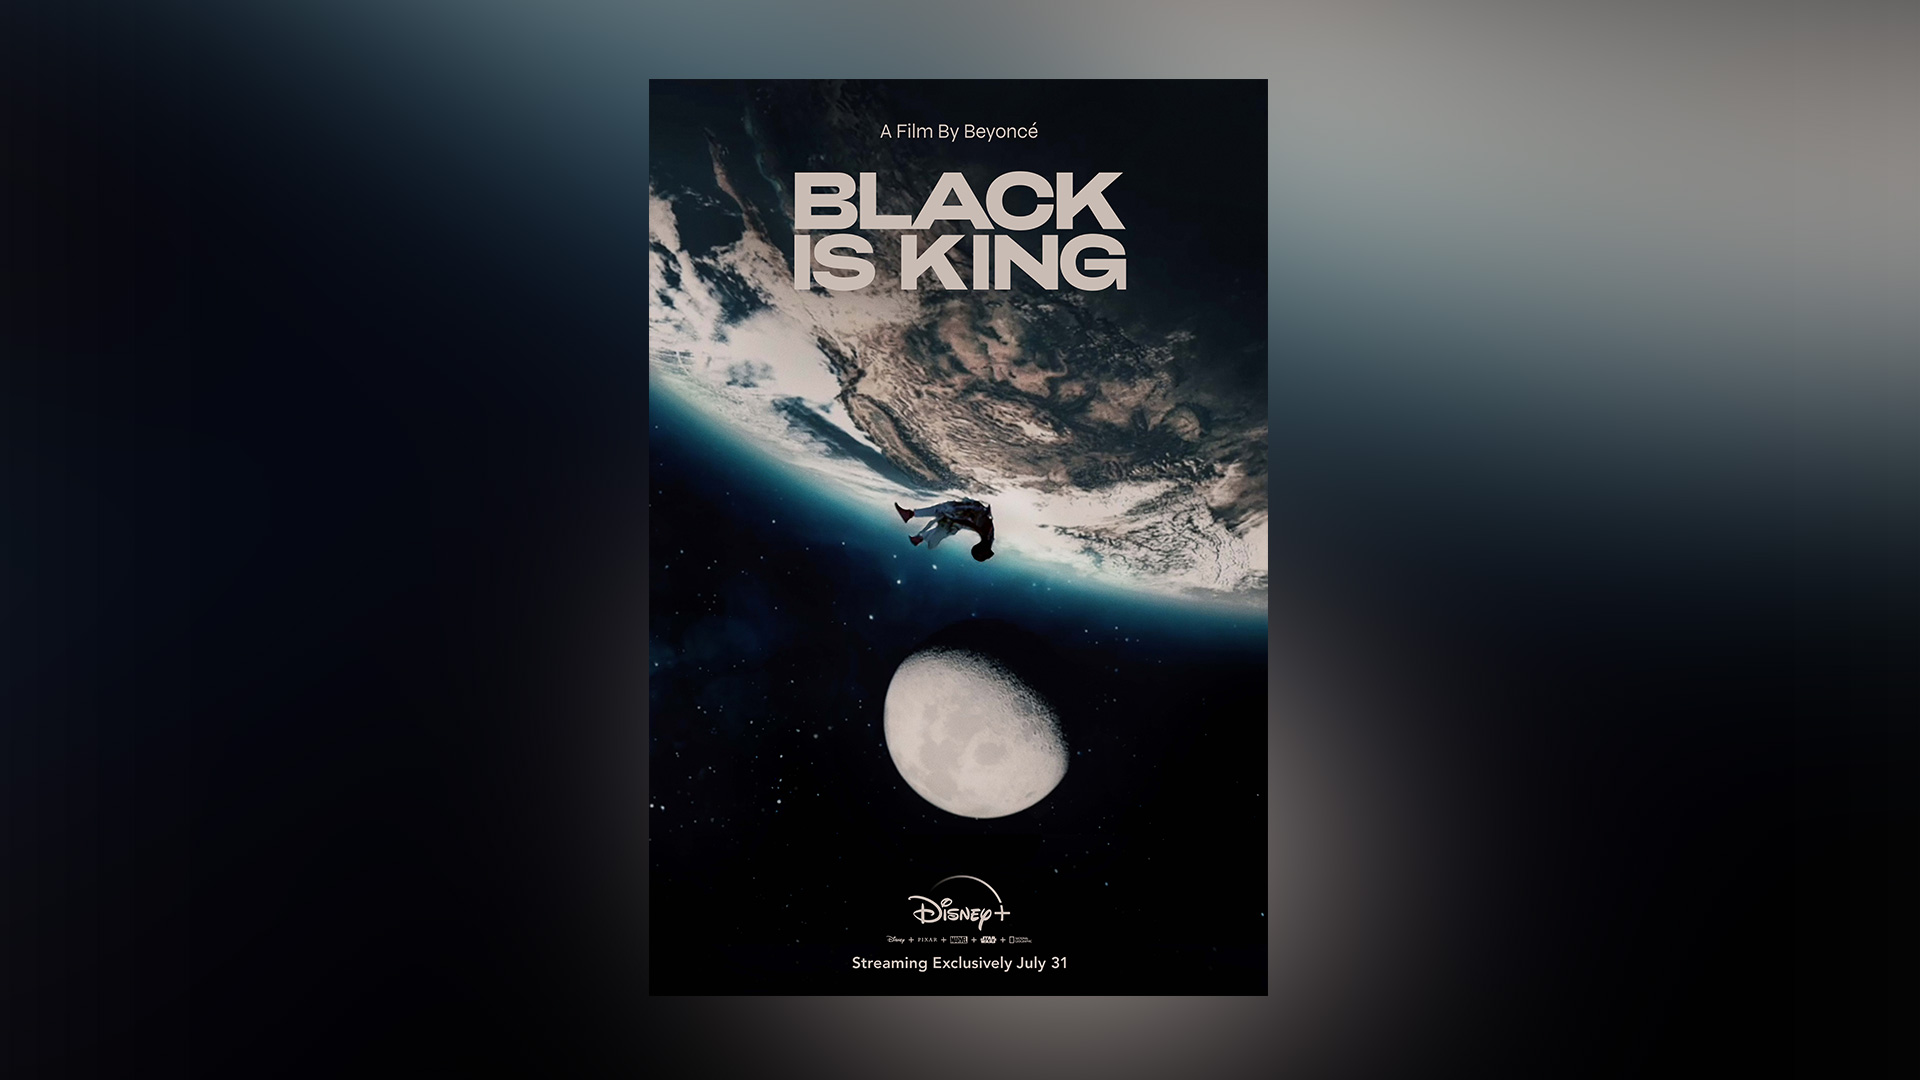 New Trailer and Poster Debut for 'Black is King' - The Walt Disney ...